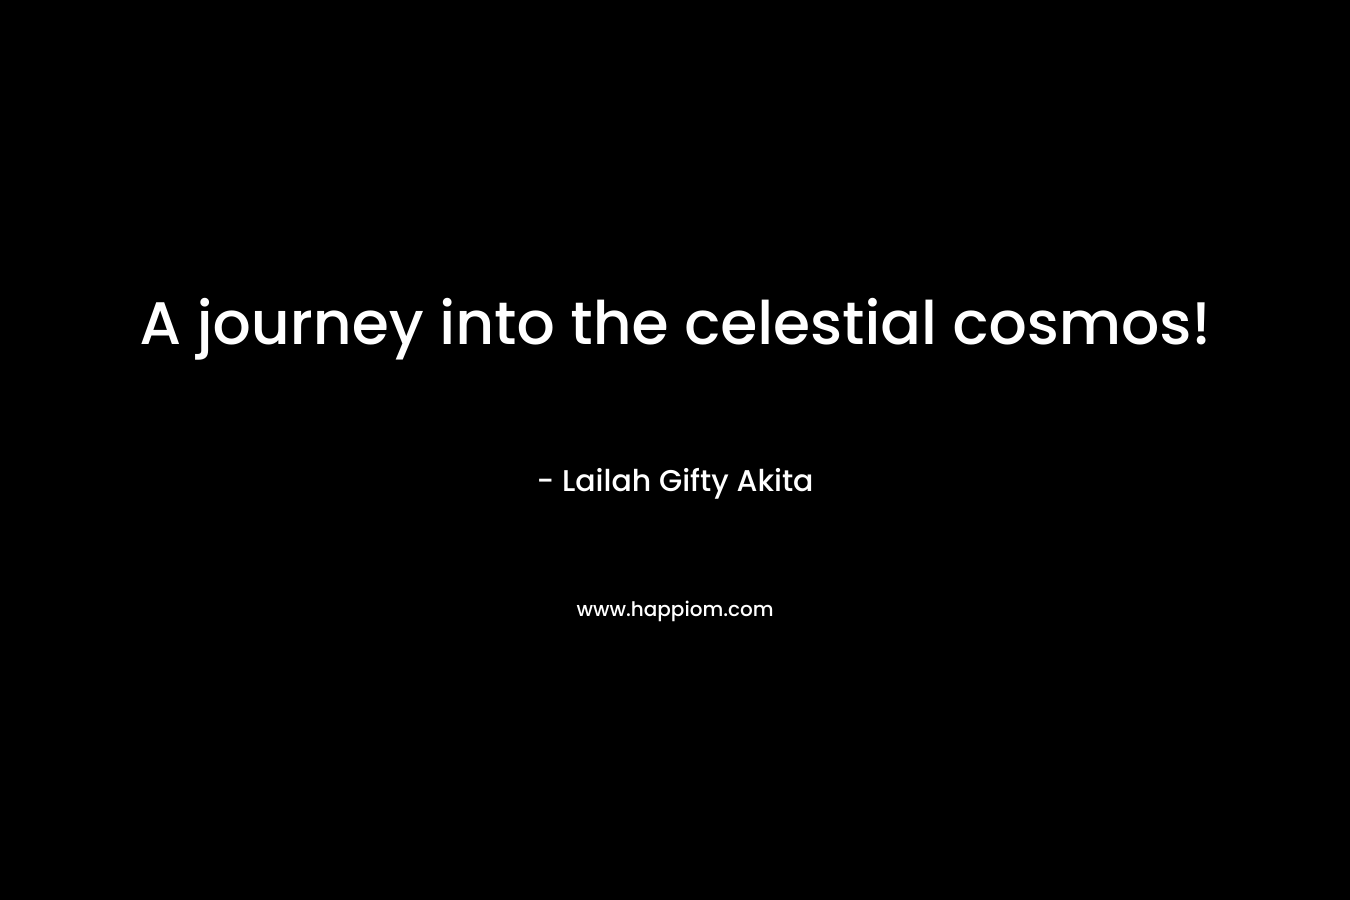 A journey into the celestial cosmos!